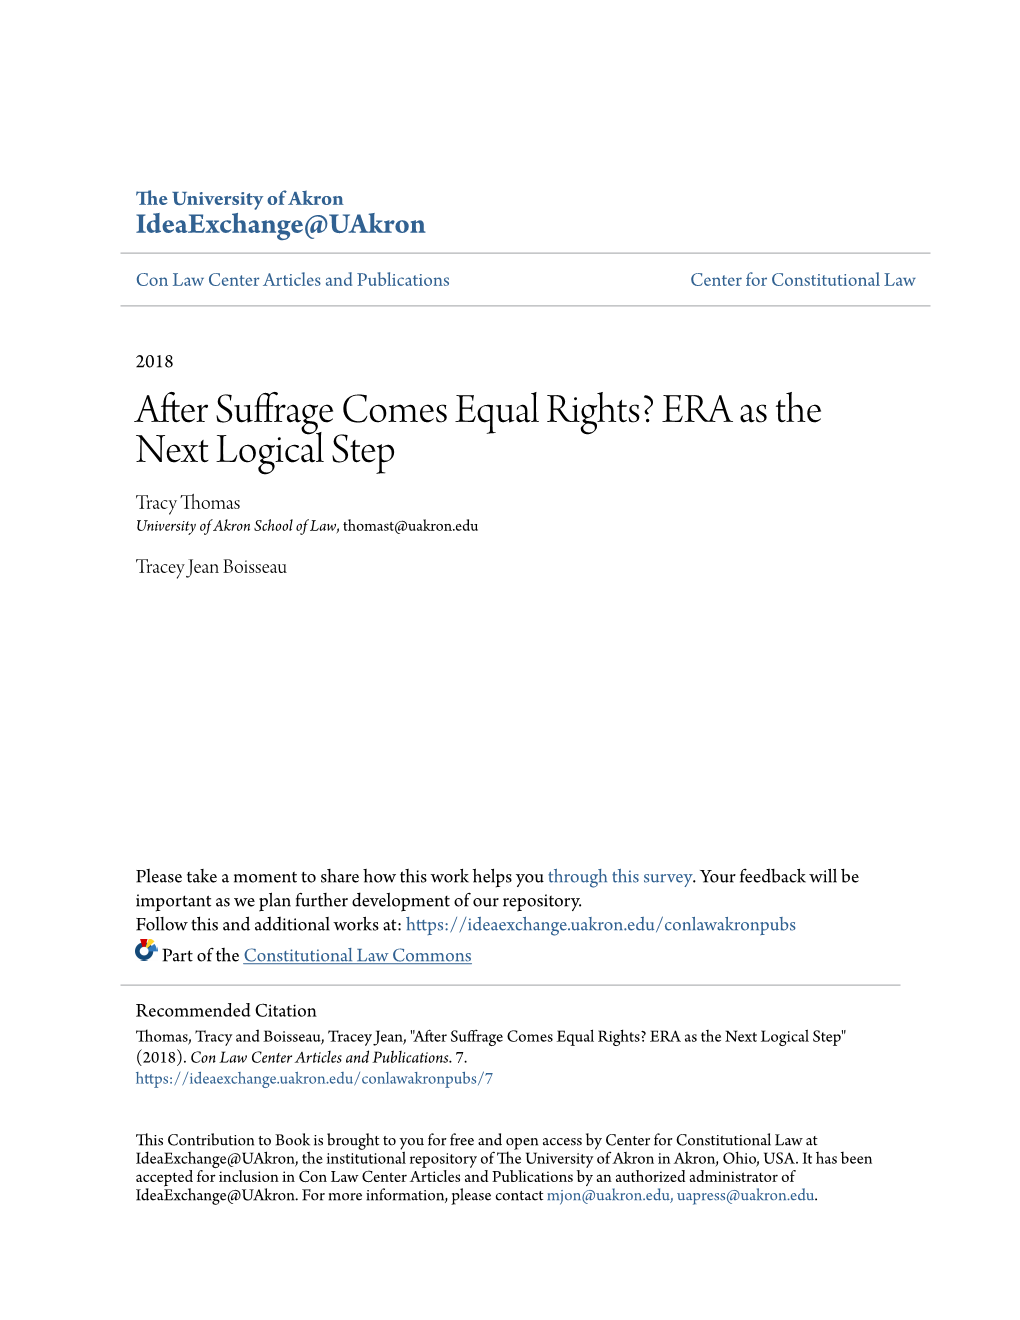 After Suffrage Comes Equal Rights? ERA Sa the Next Logical Step Tracy Thomas University of Akron School of Law, Thomast@Uakron.Edu